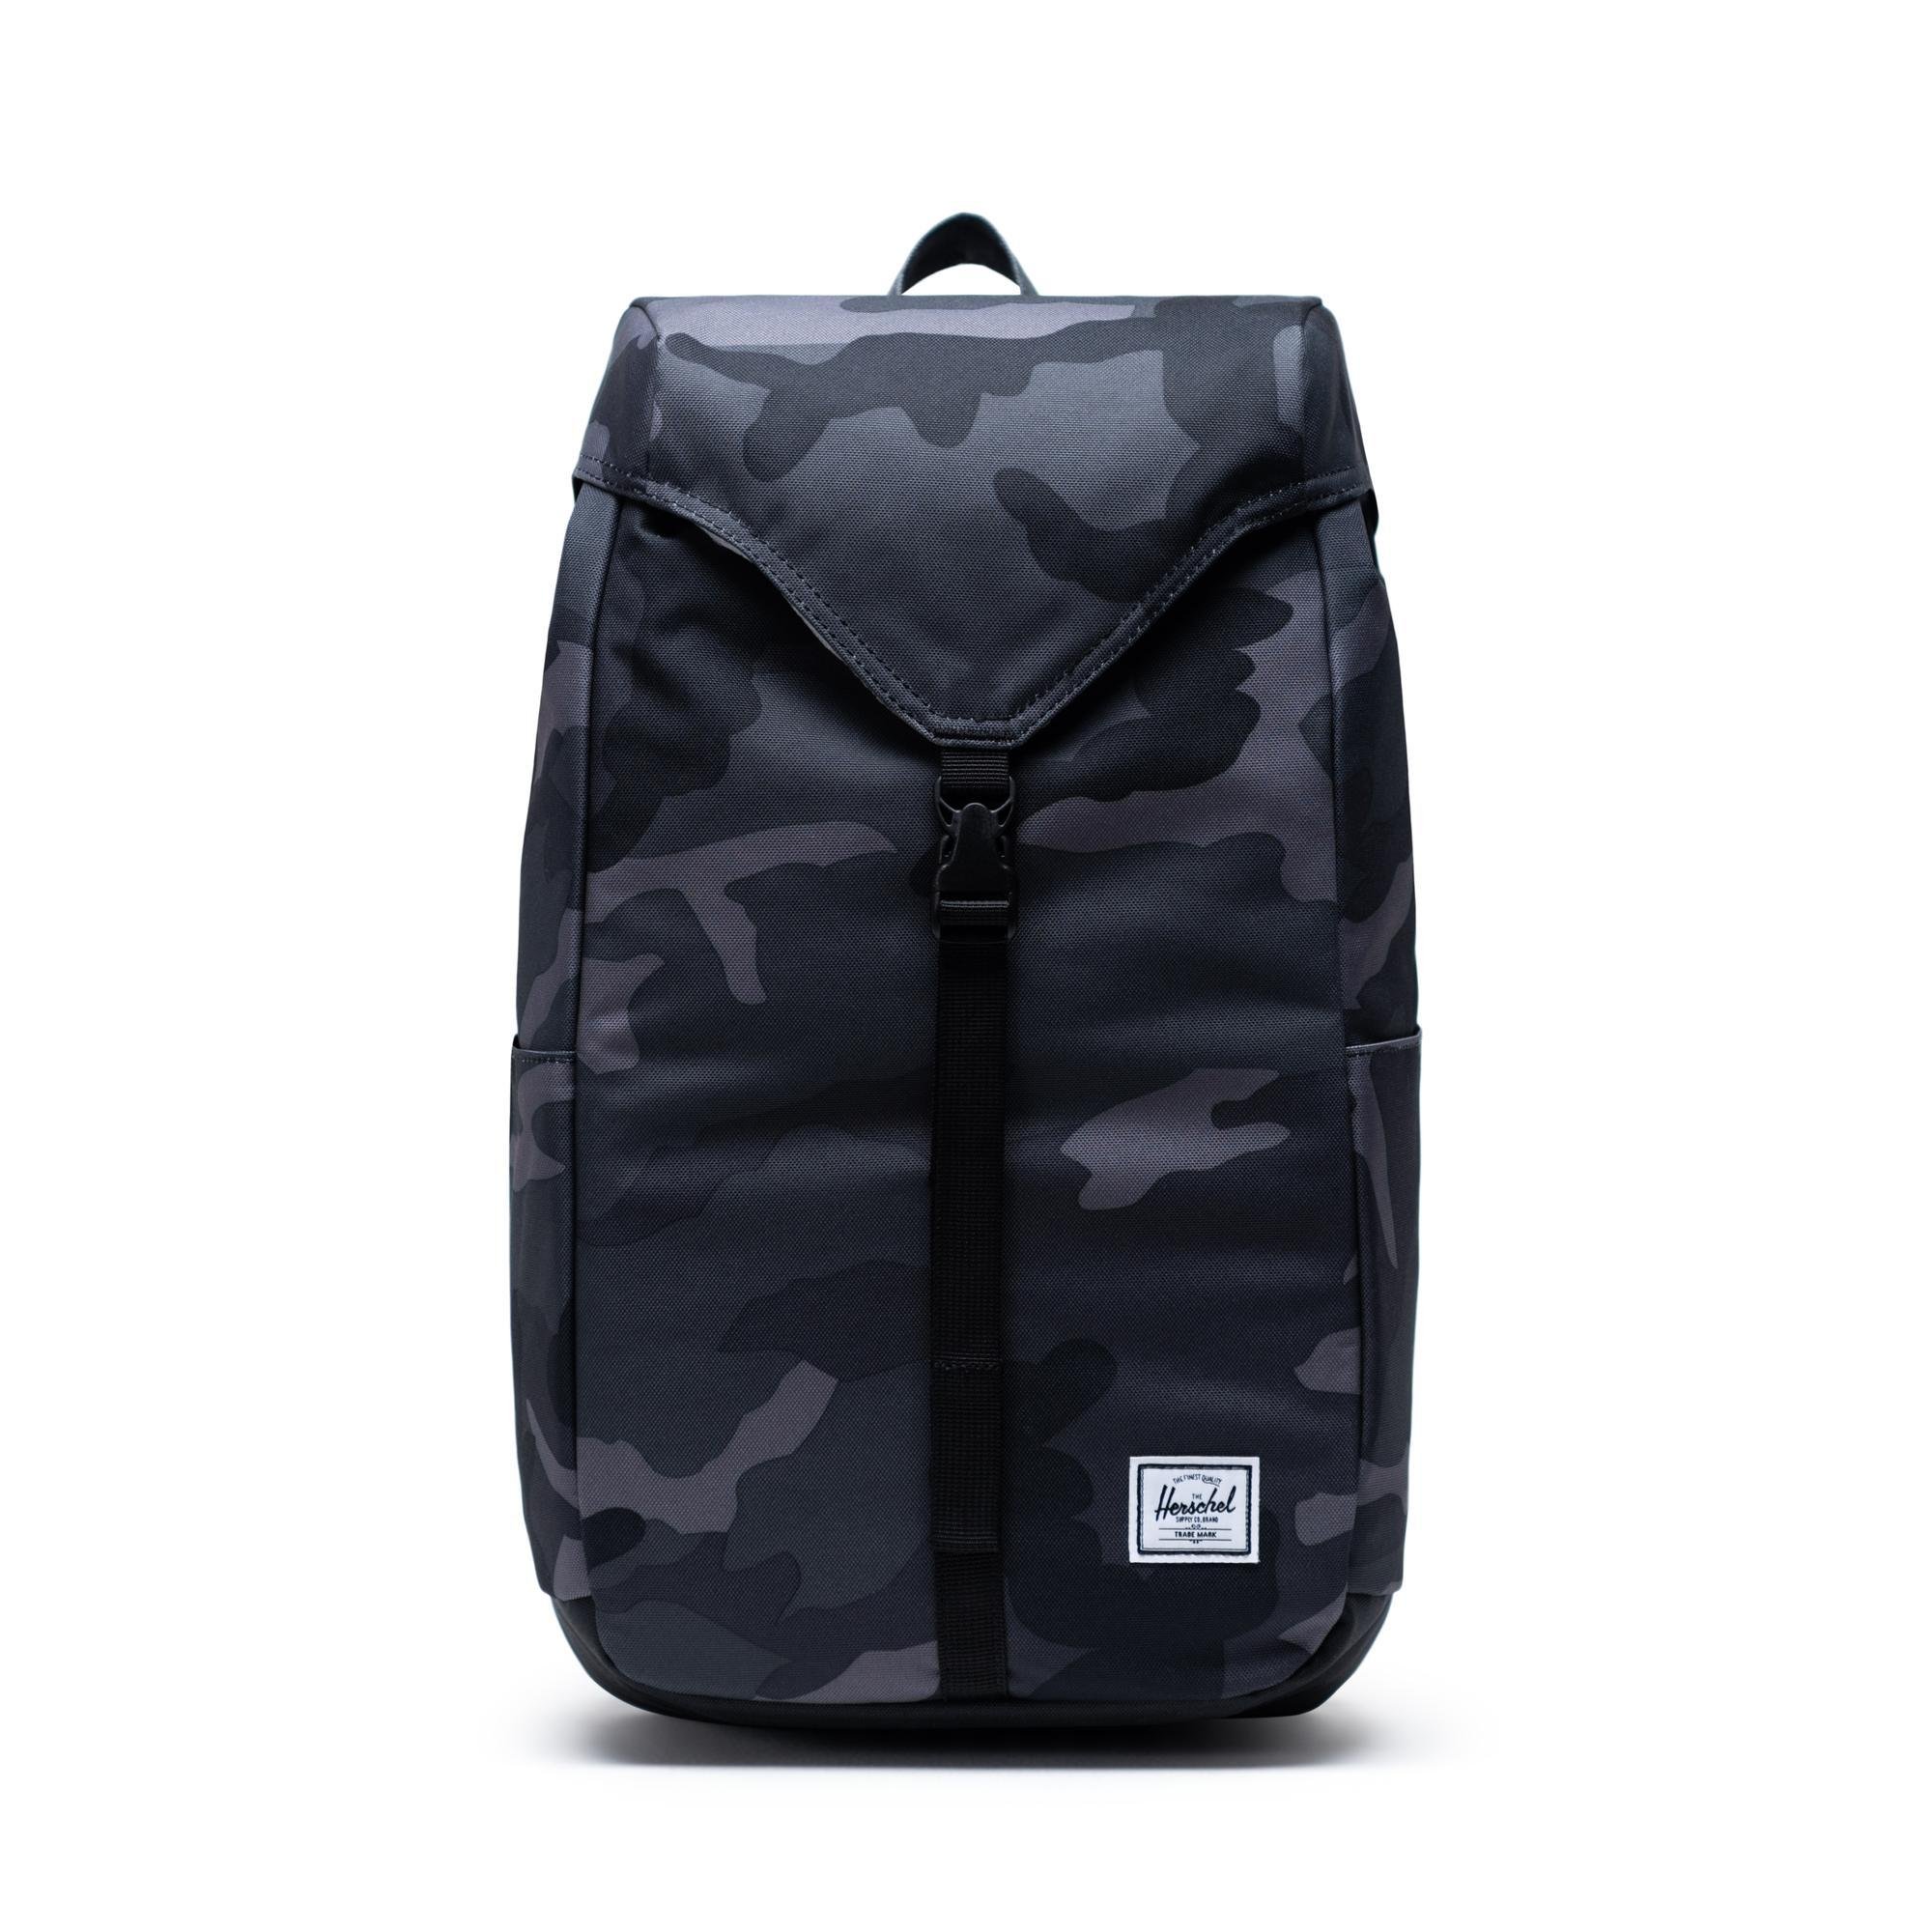 Thompson Backpack by HERSCHEL SUPPLY CO